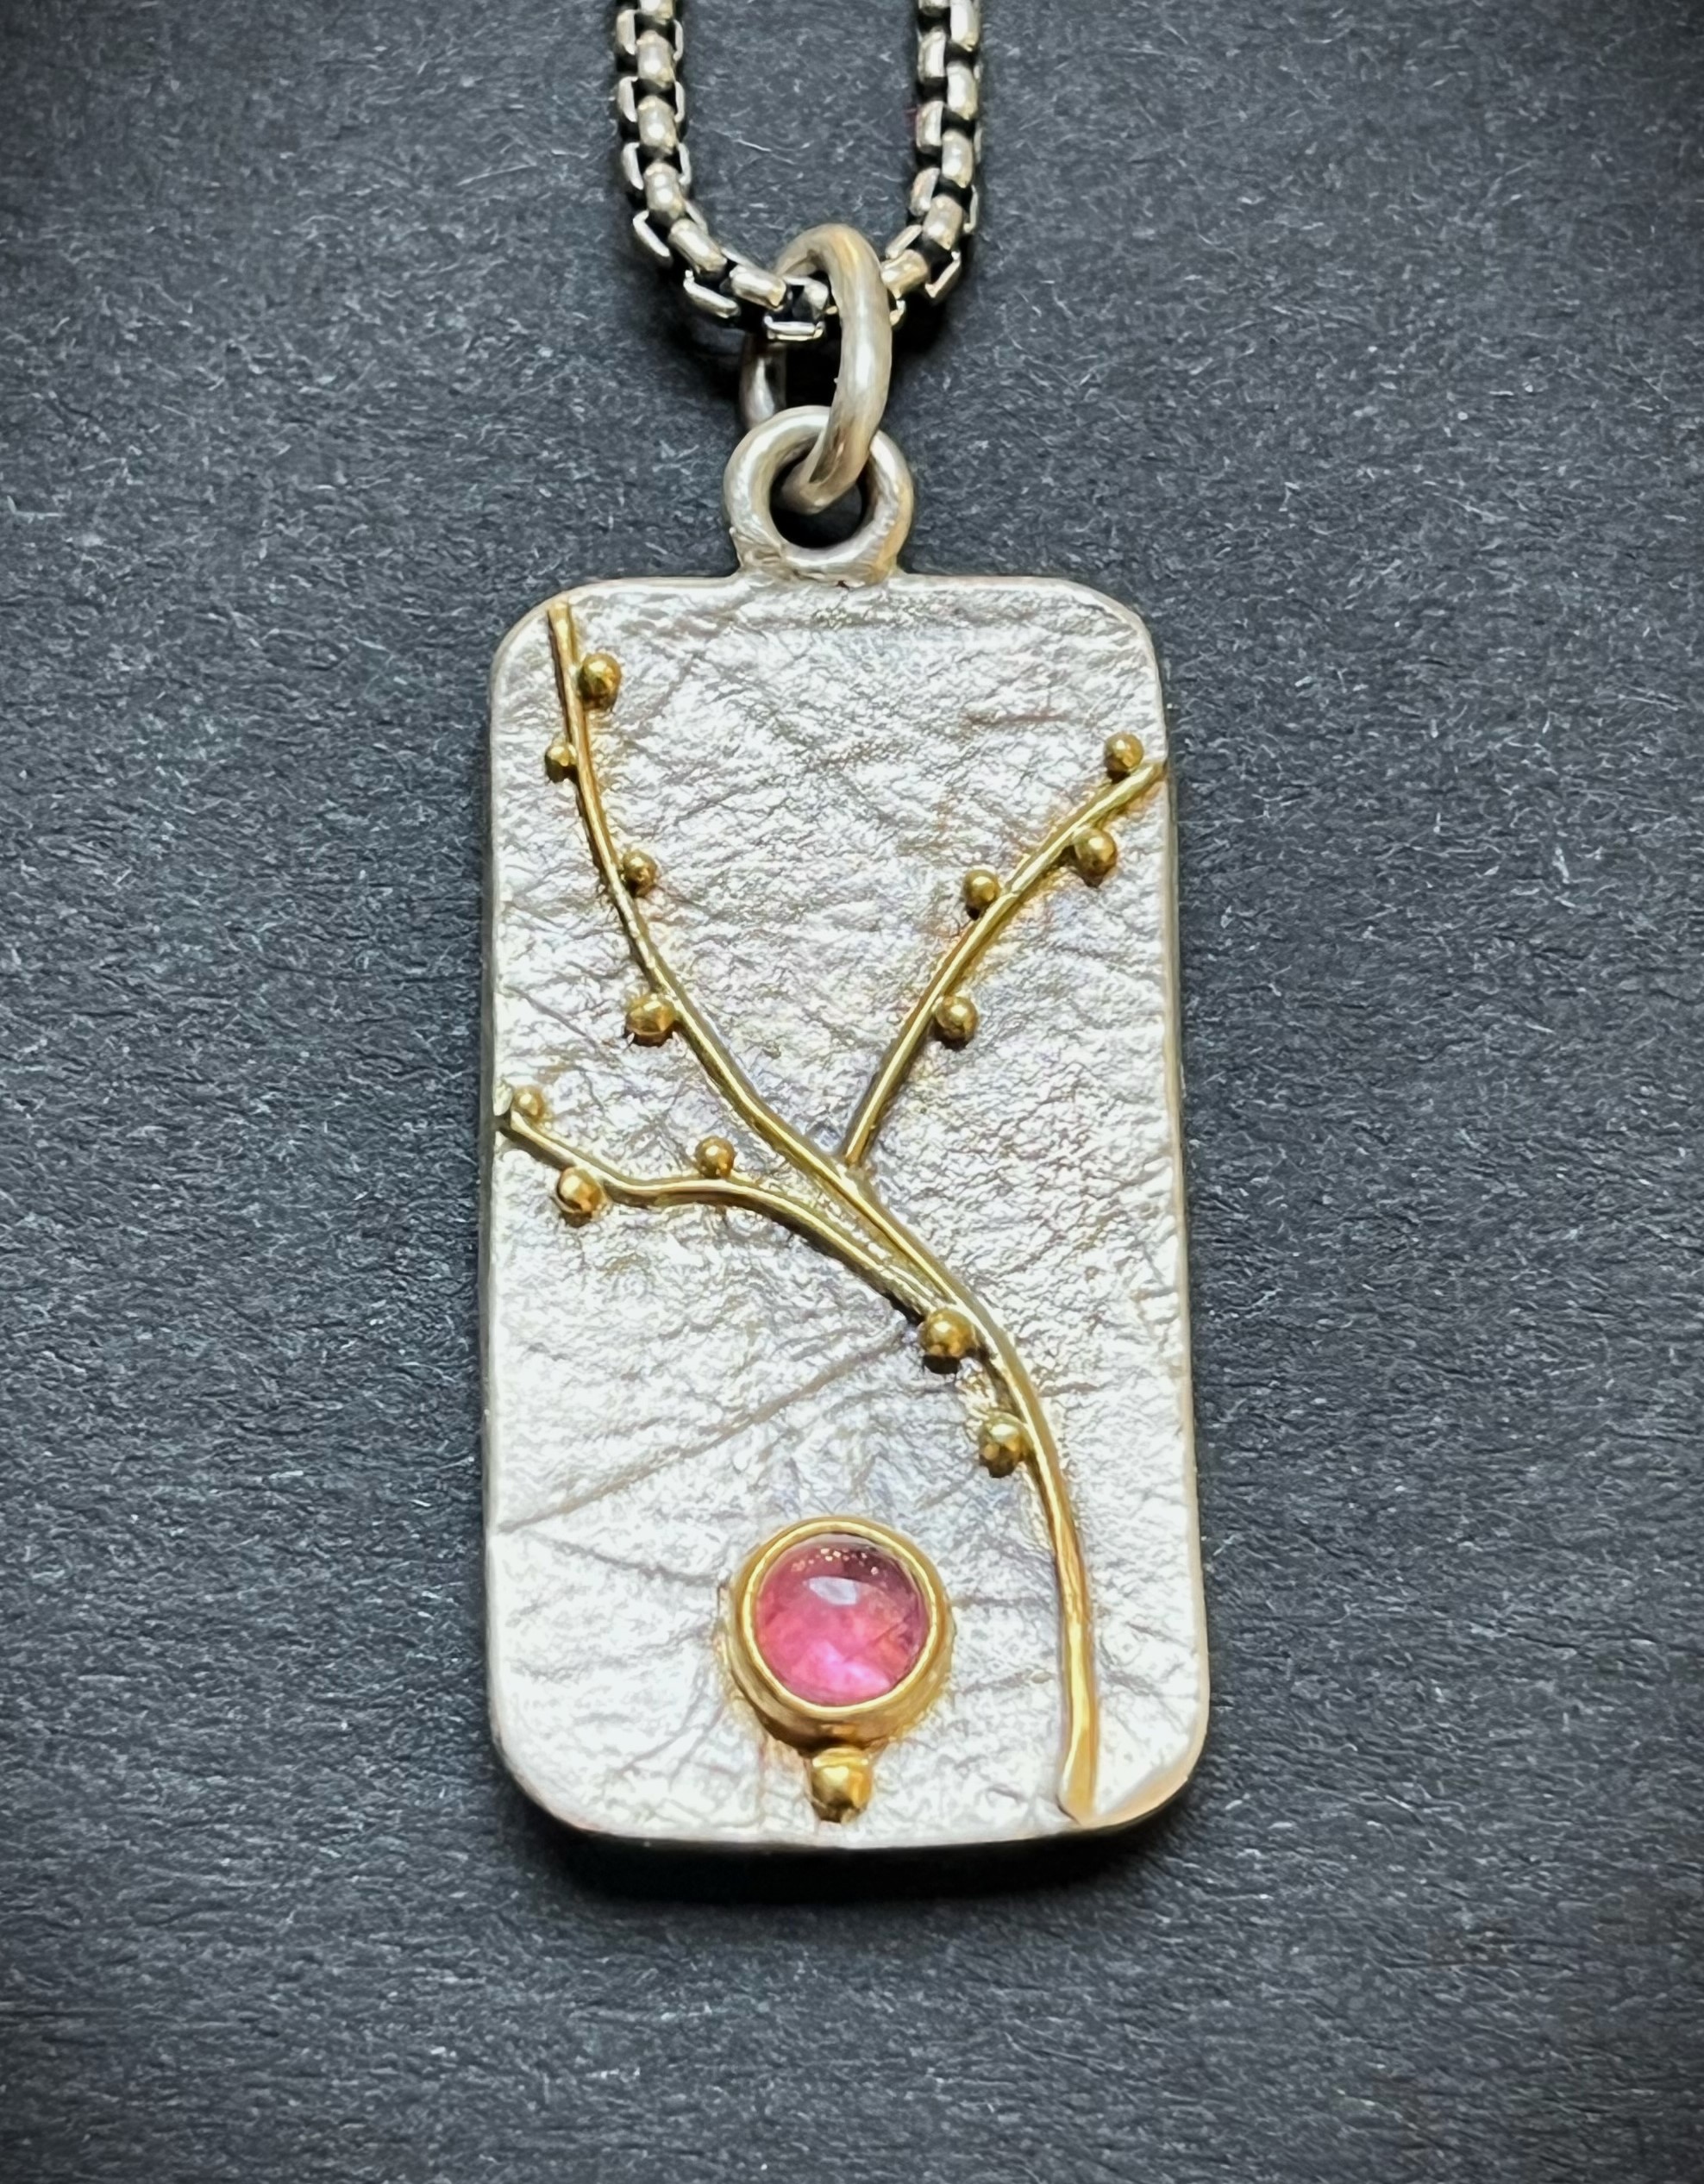 Botany Necklace 25x18 mm Sterling Silver, 22k GoldPink Tourmaline 4mm diameter 18” rounded box chain